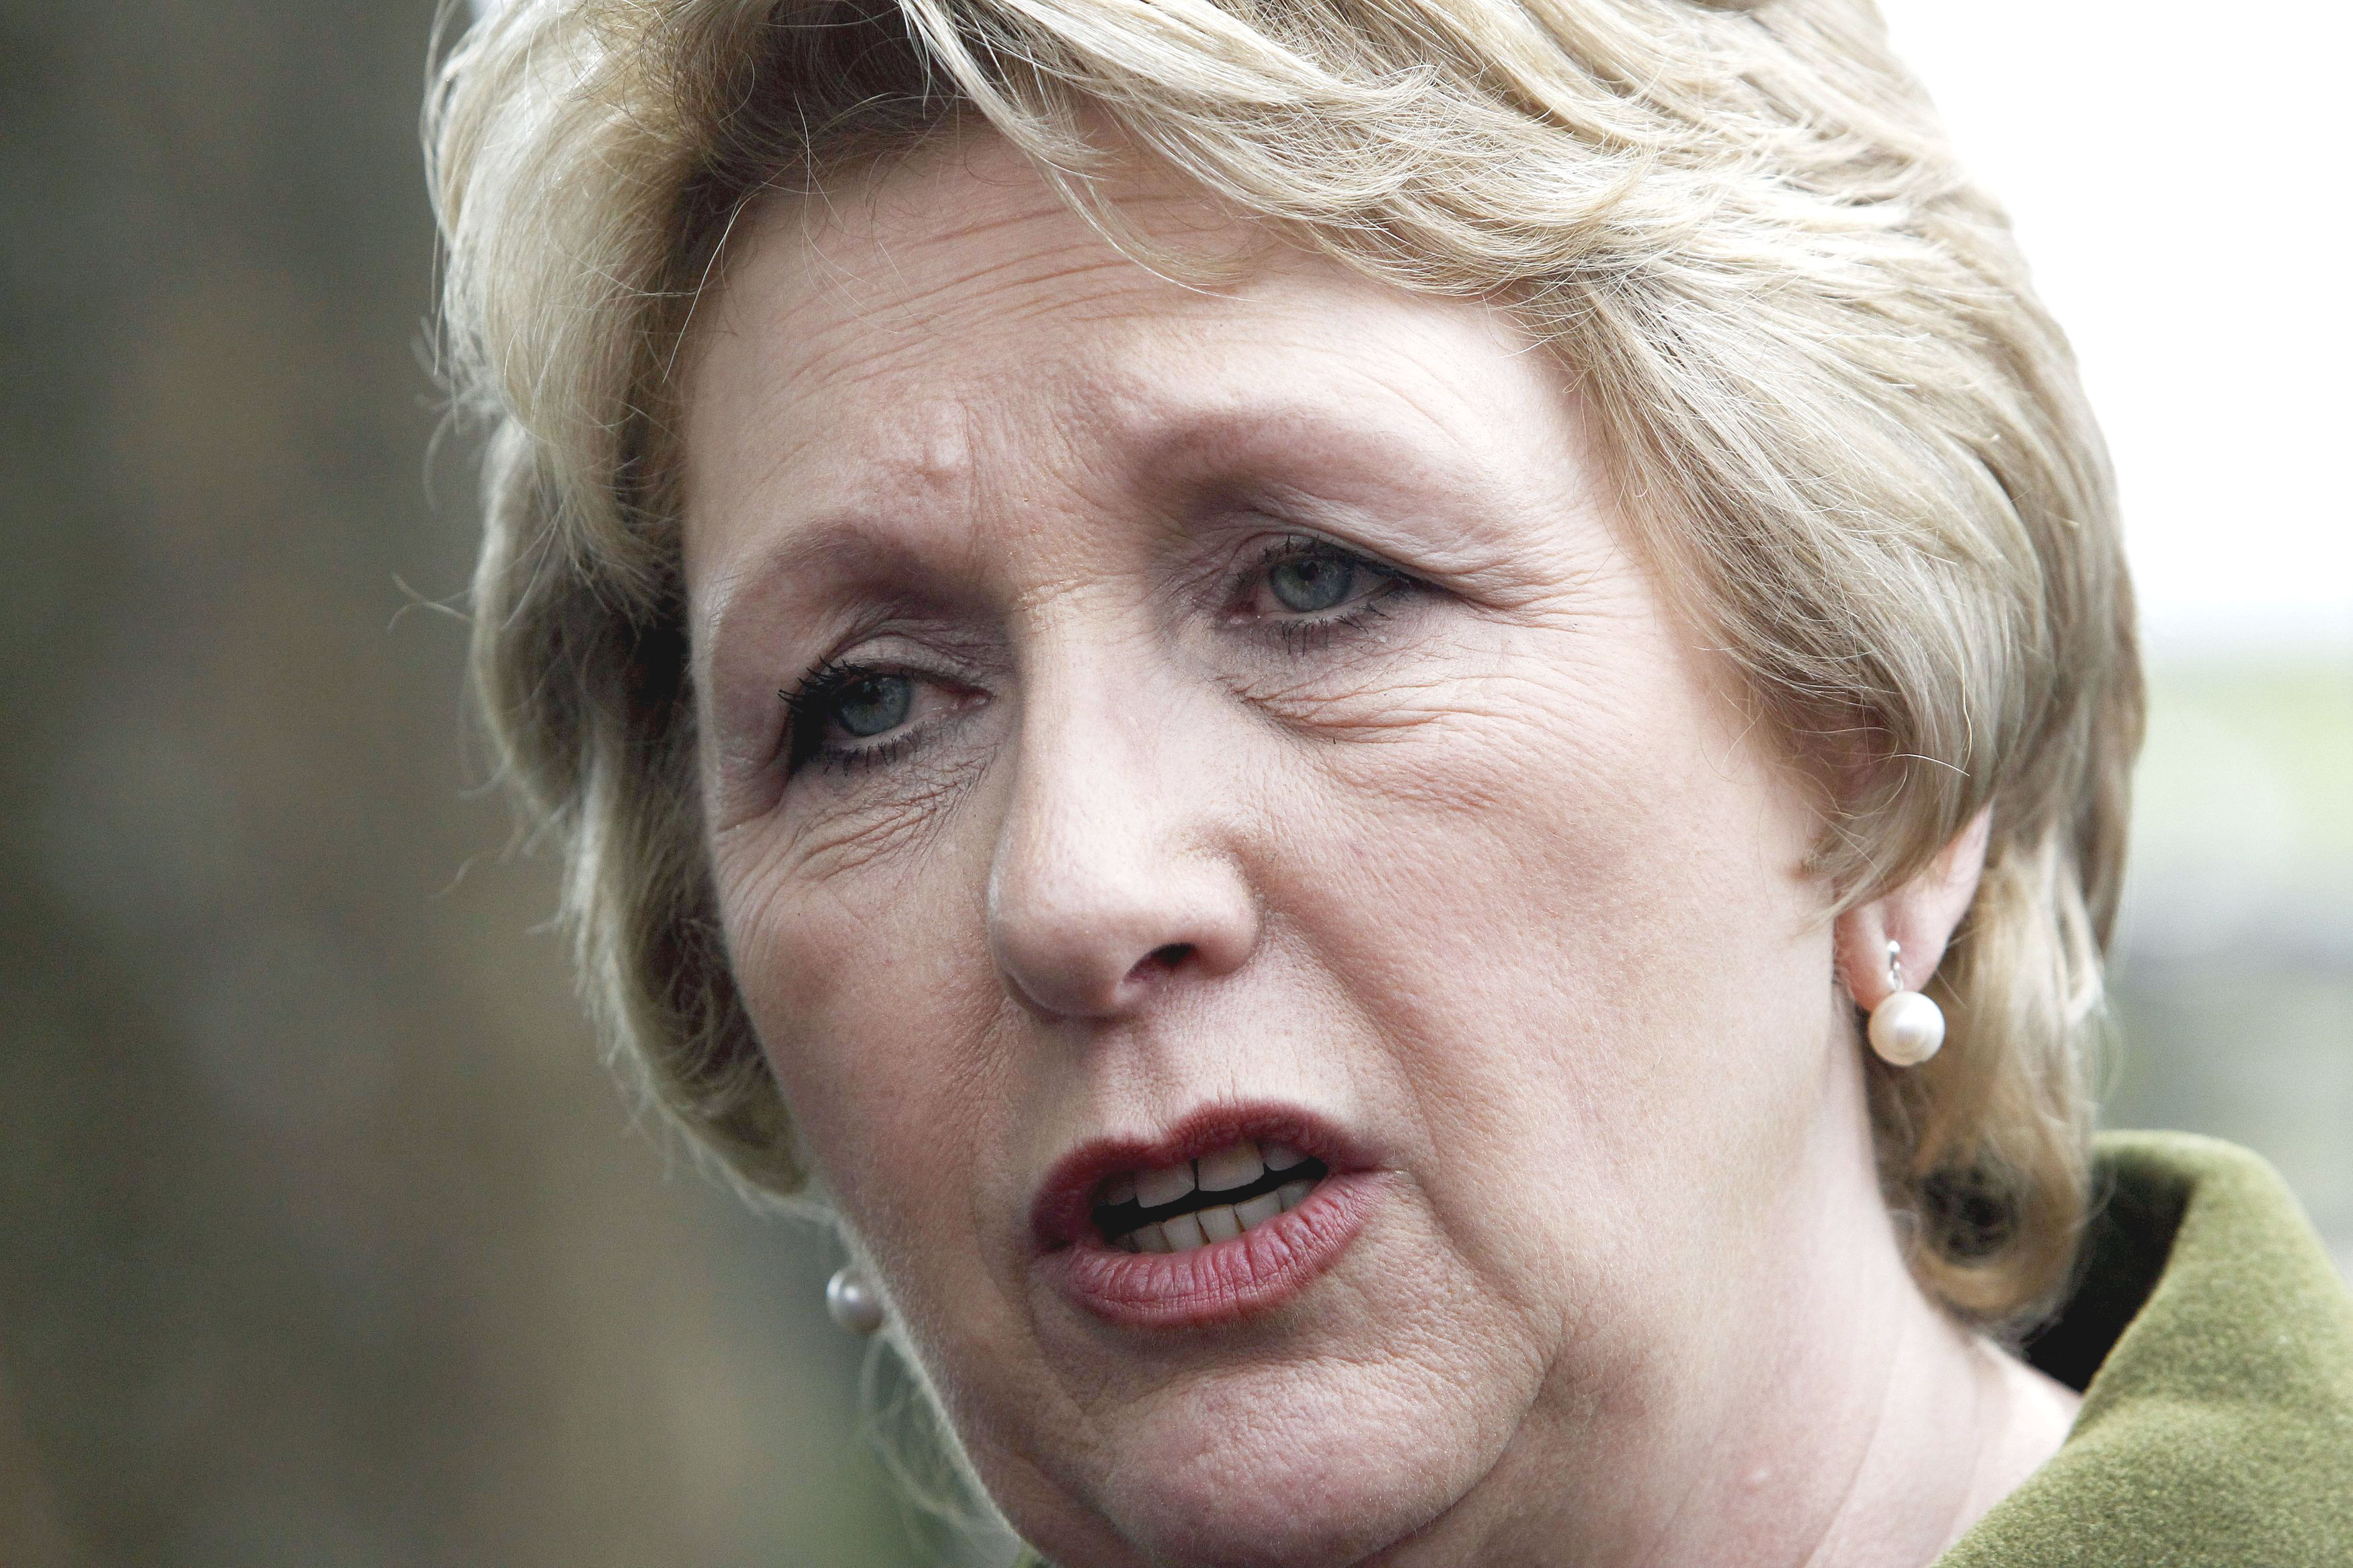 Women leaving Church 'in droves' warns McAleese